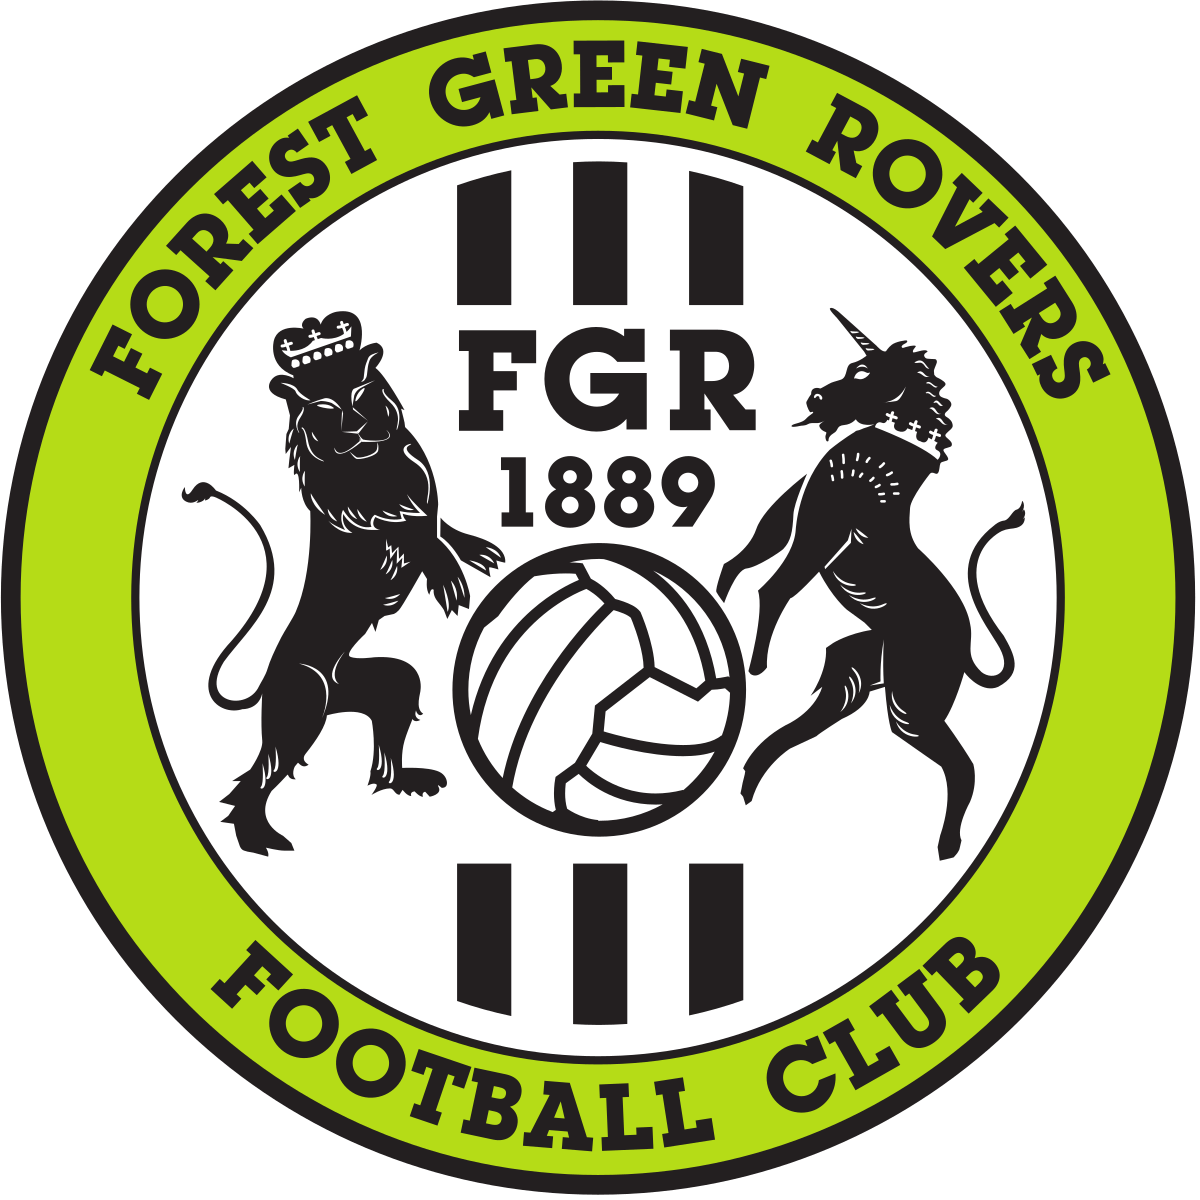 Green Badge Logo - Forest Green Rovers F.C